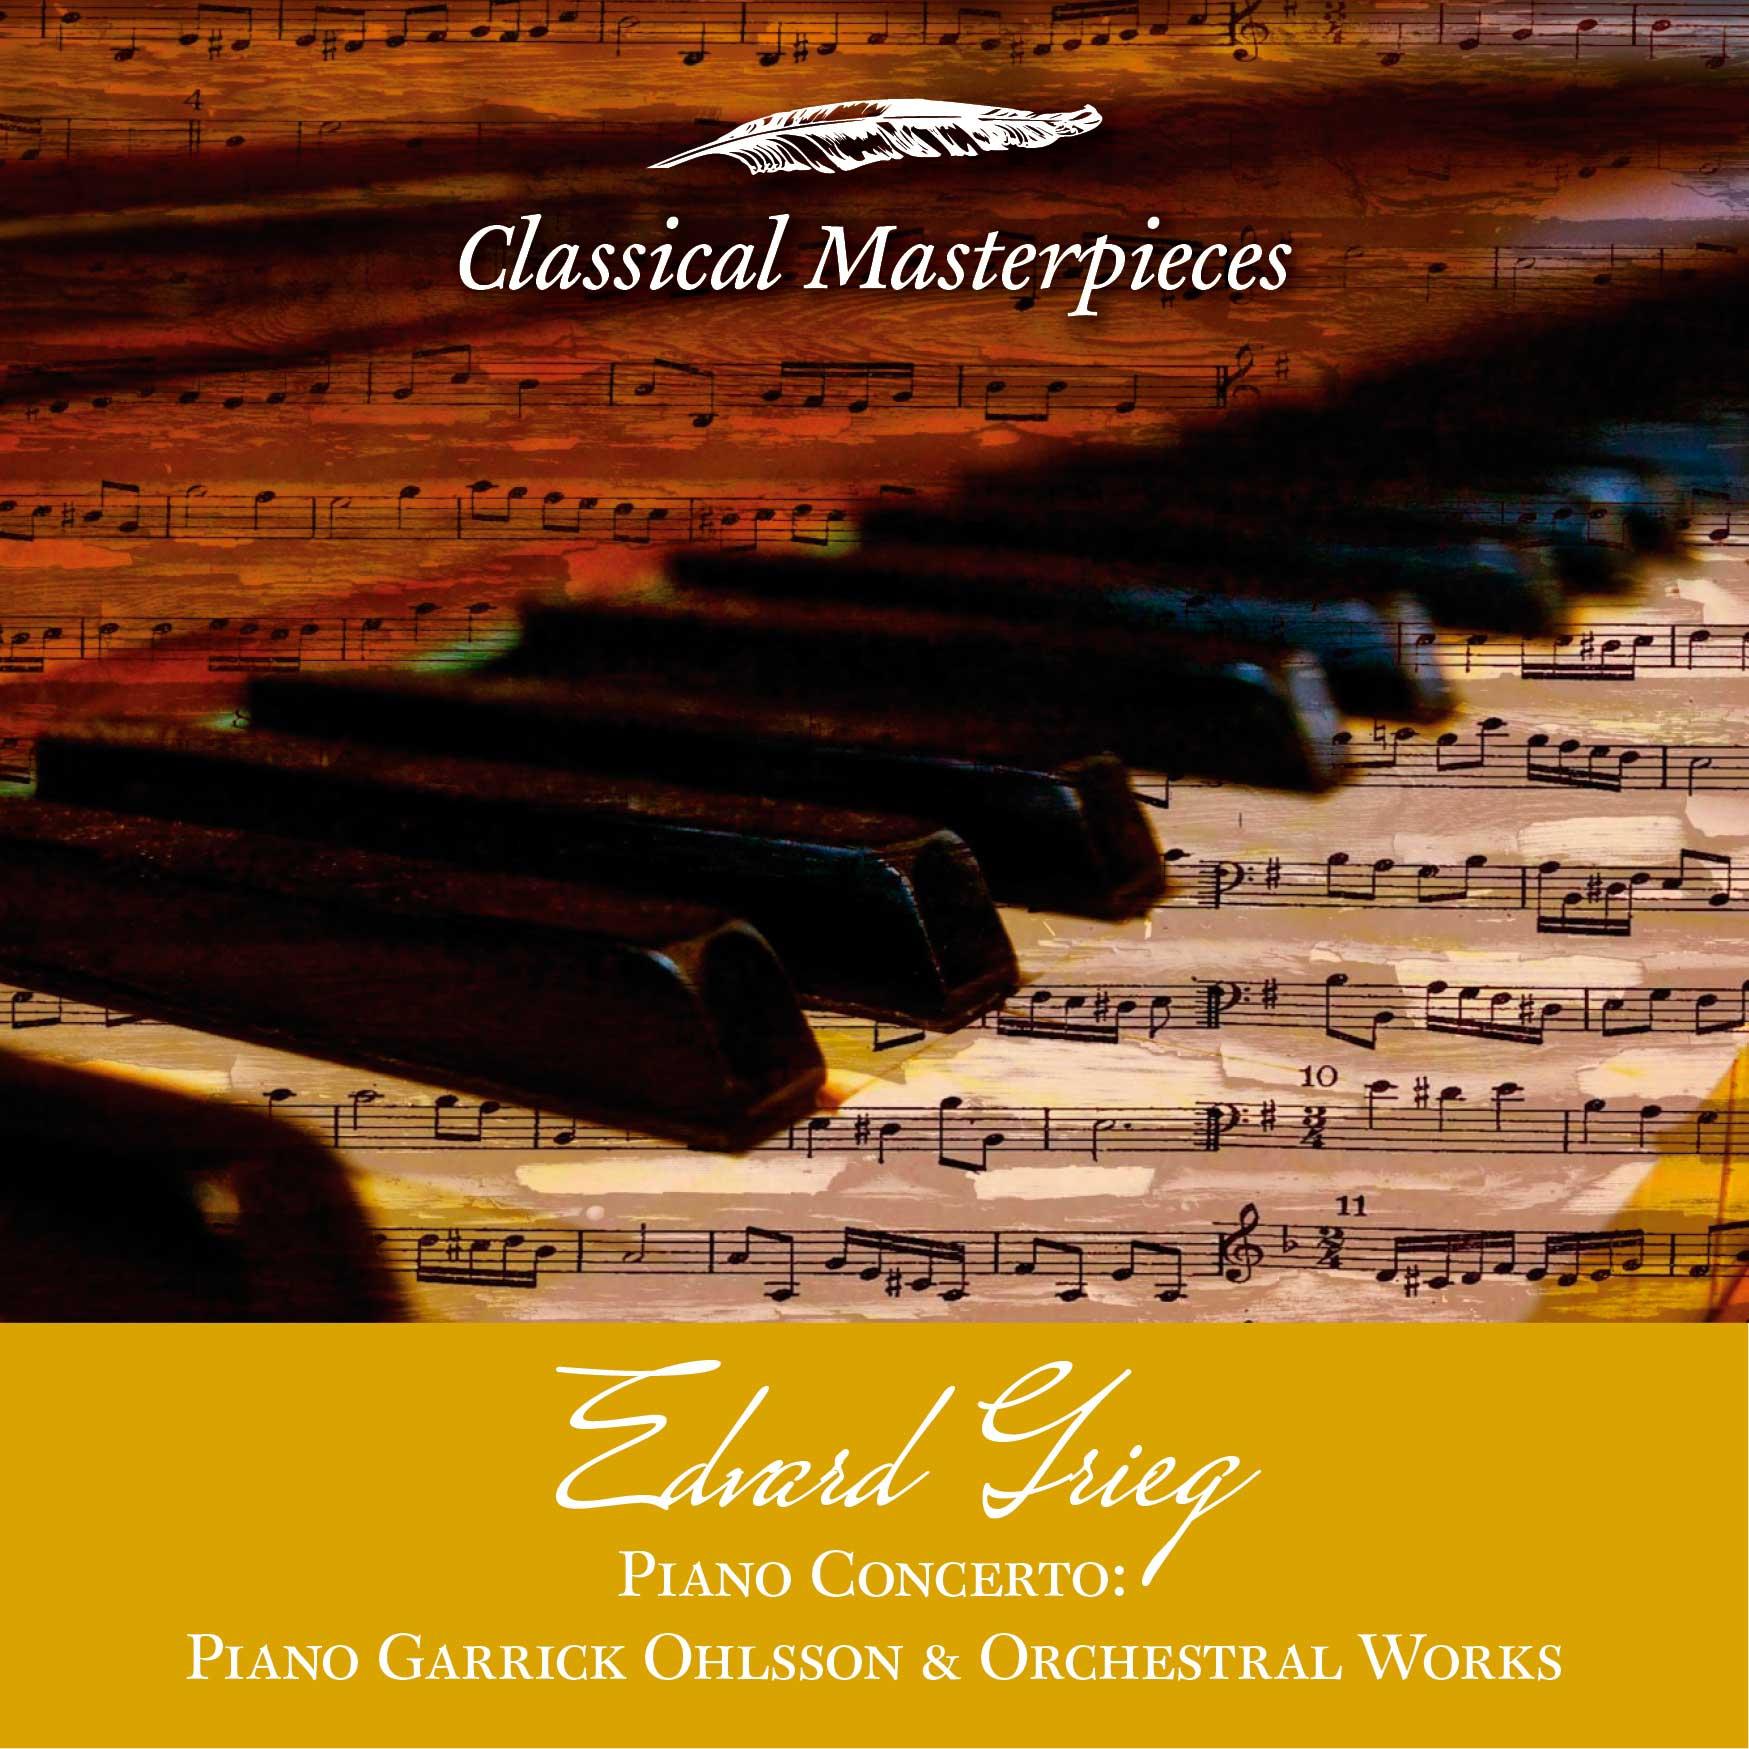 Edvard Grieg: Orchestral Works & Piano Concerto